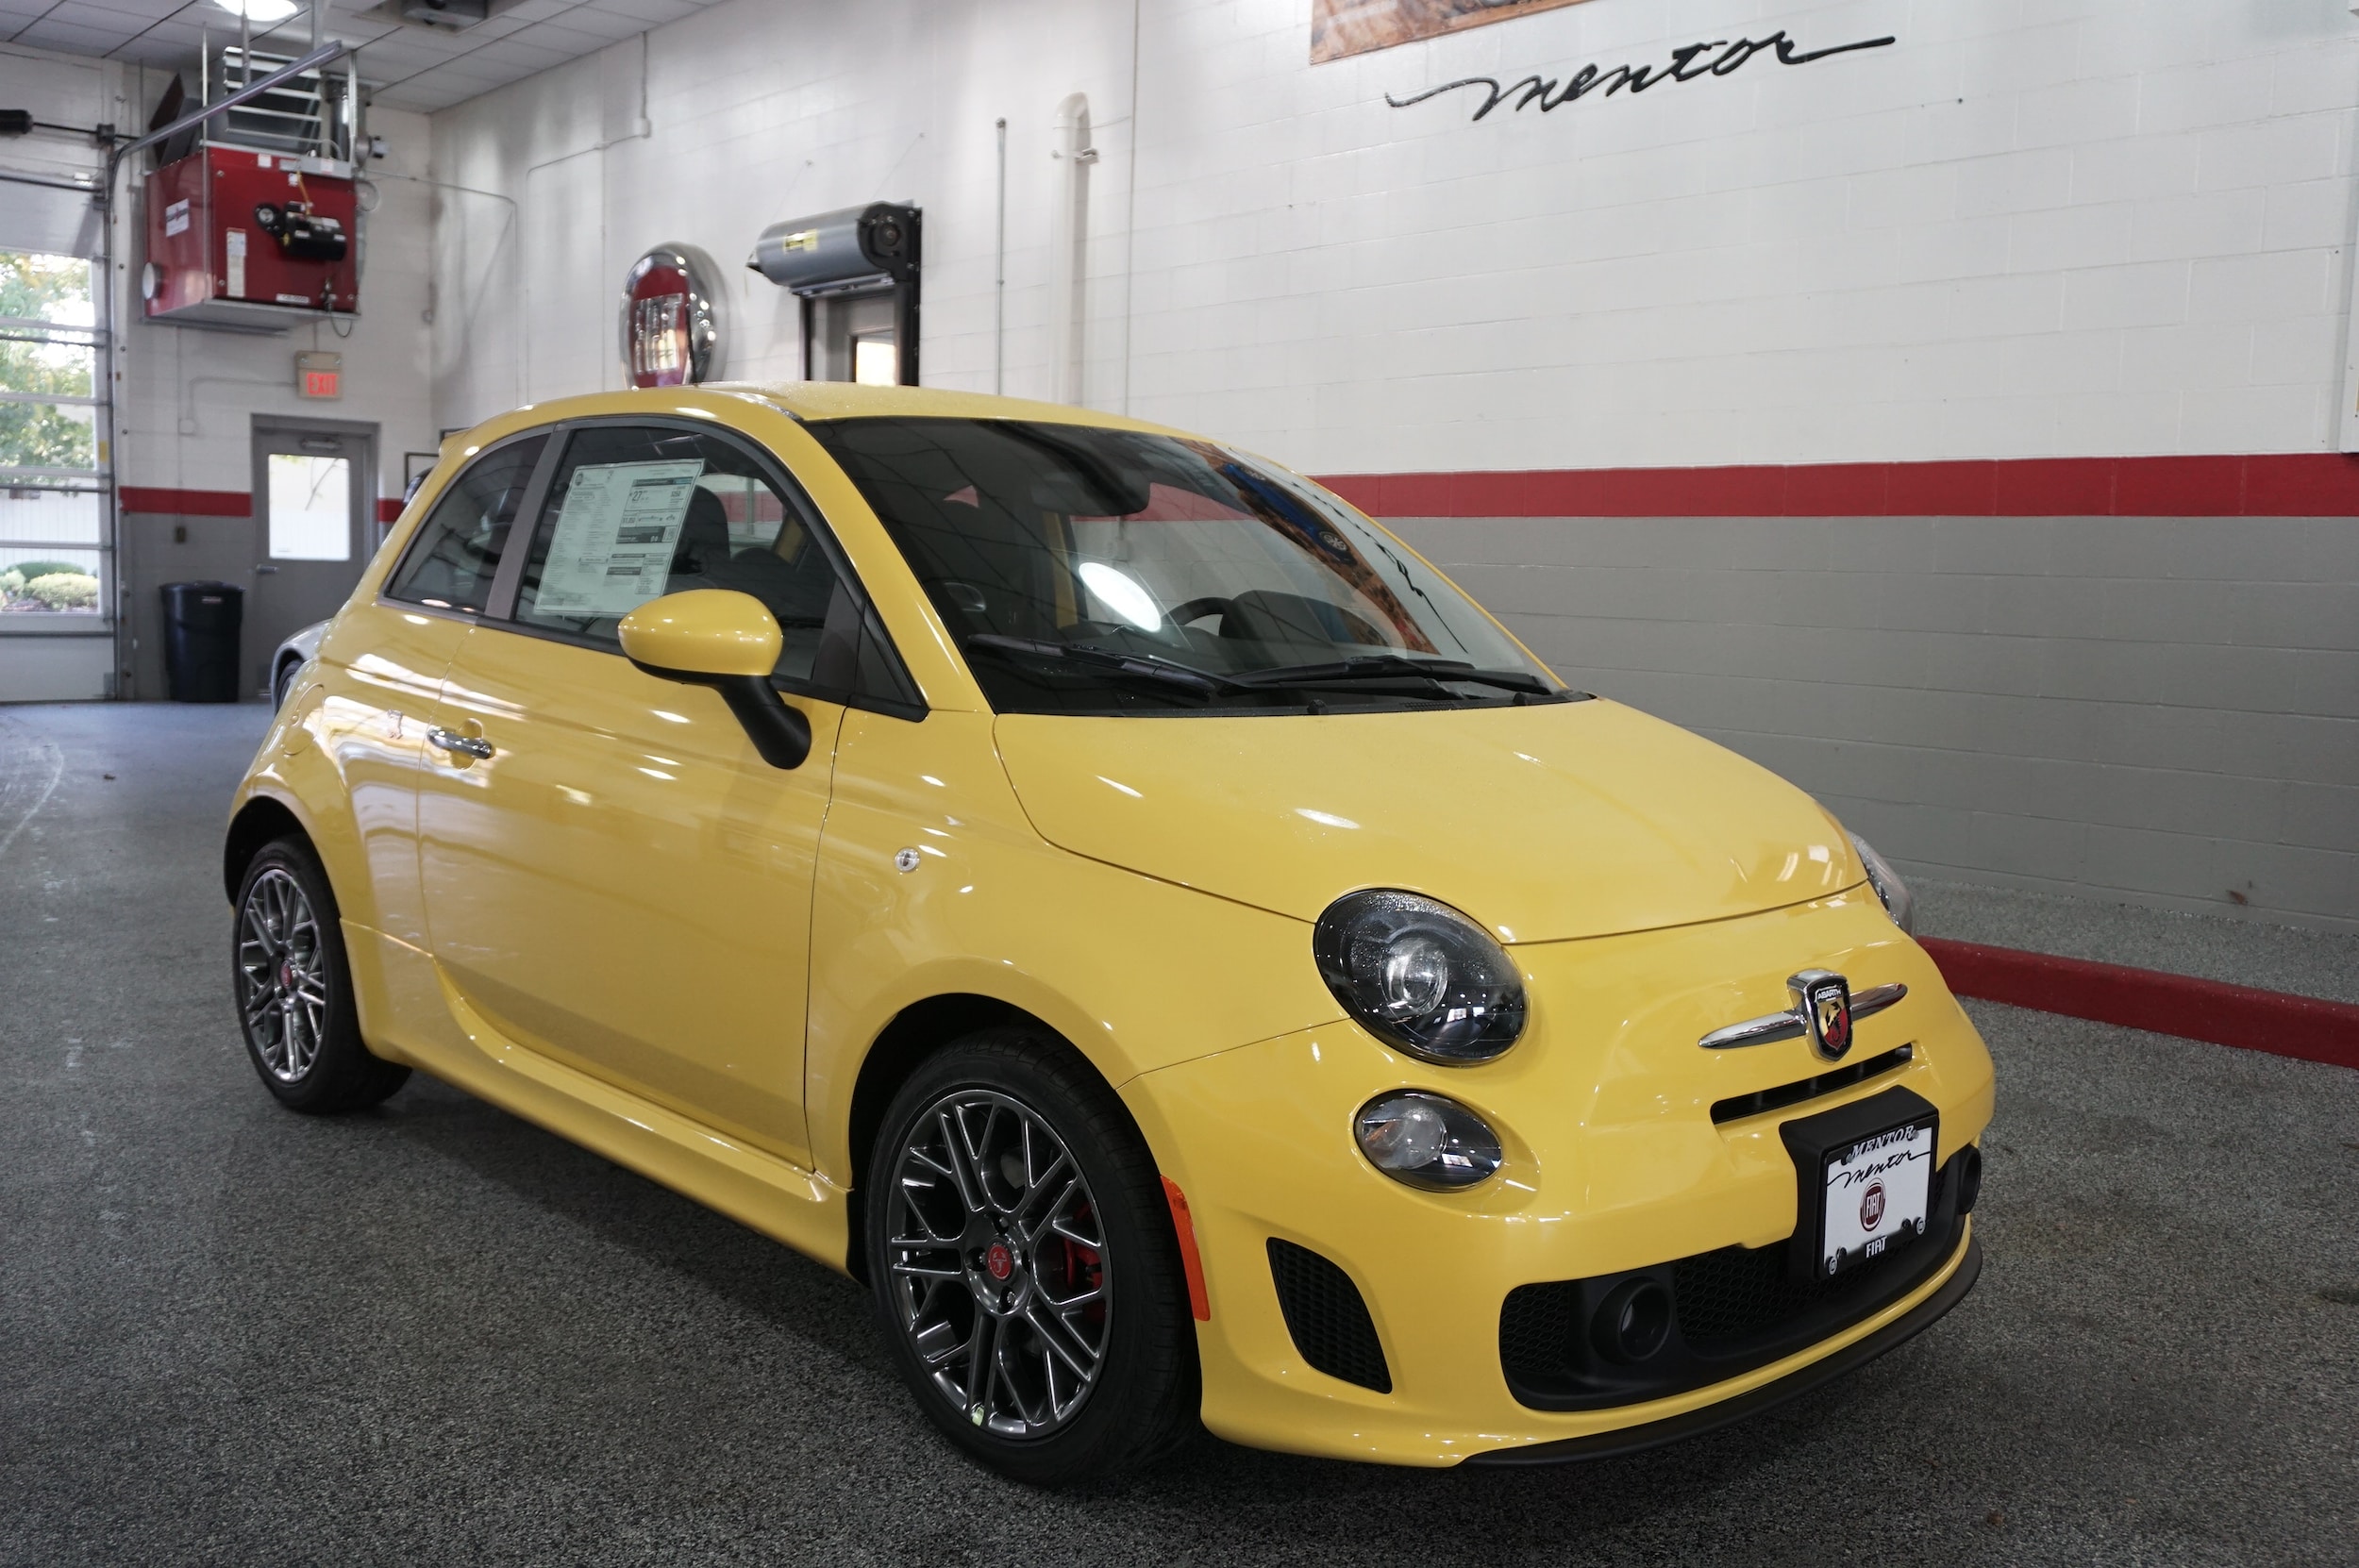 Gallery For gt; 2016 Fiat 500 Abarth